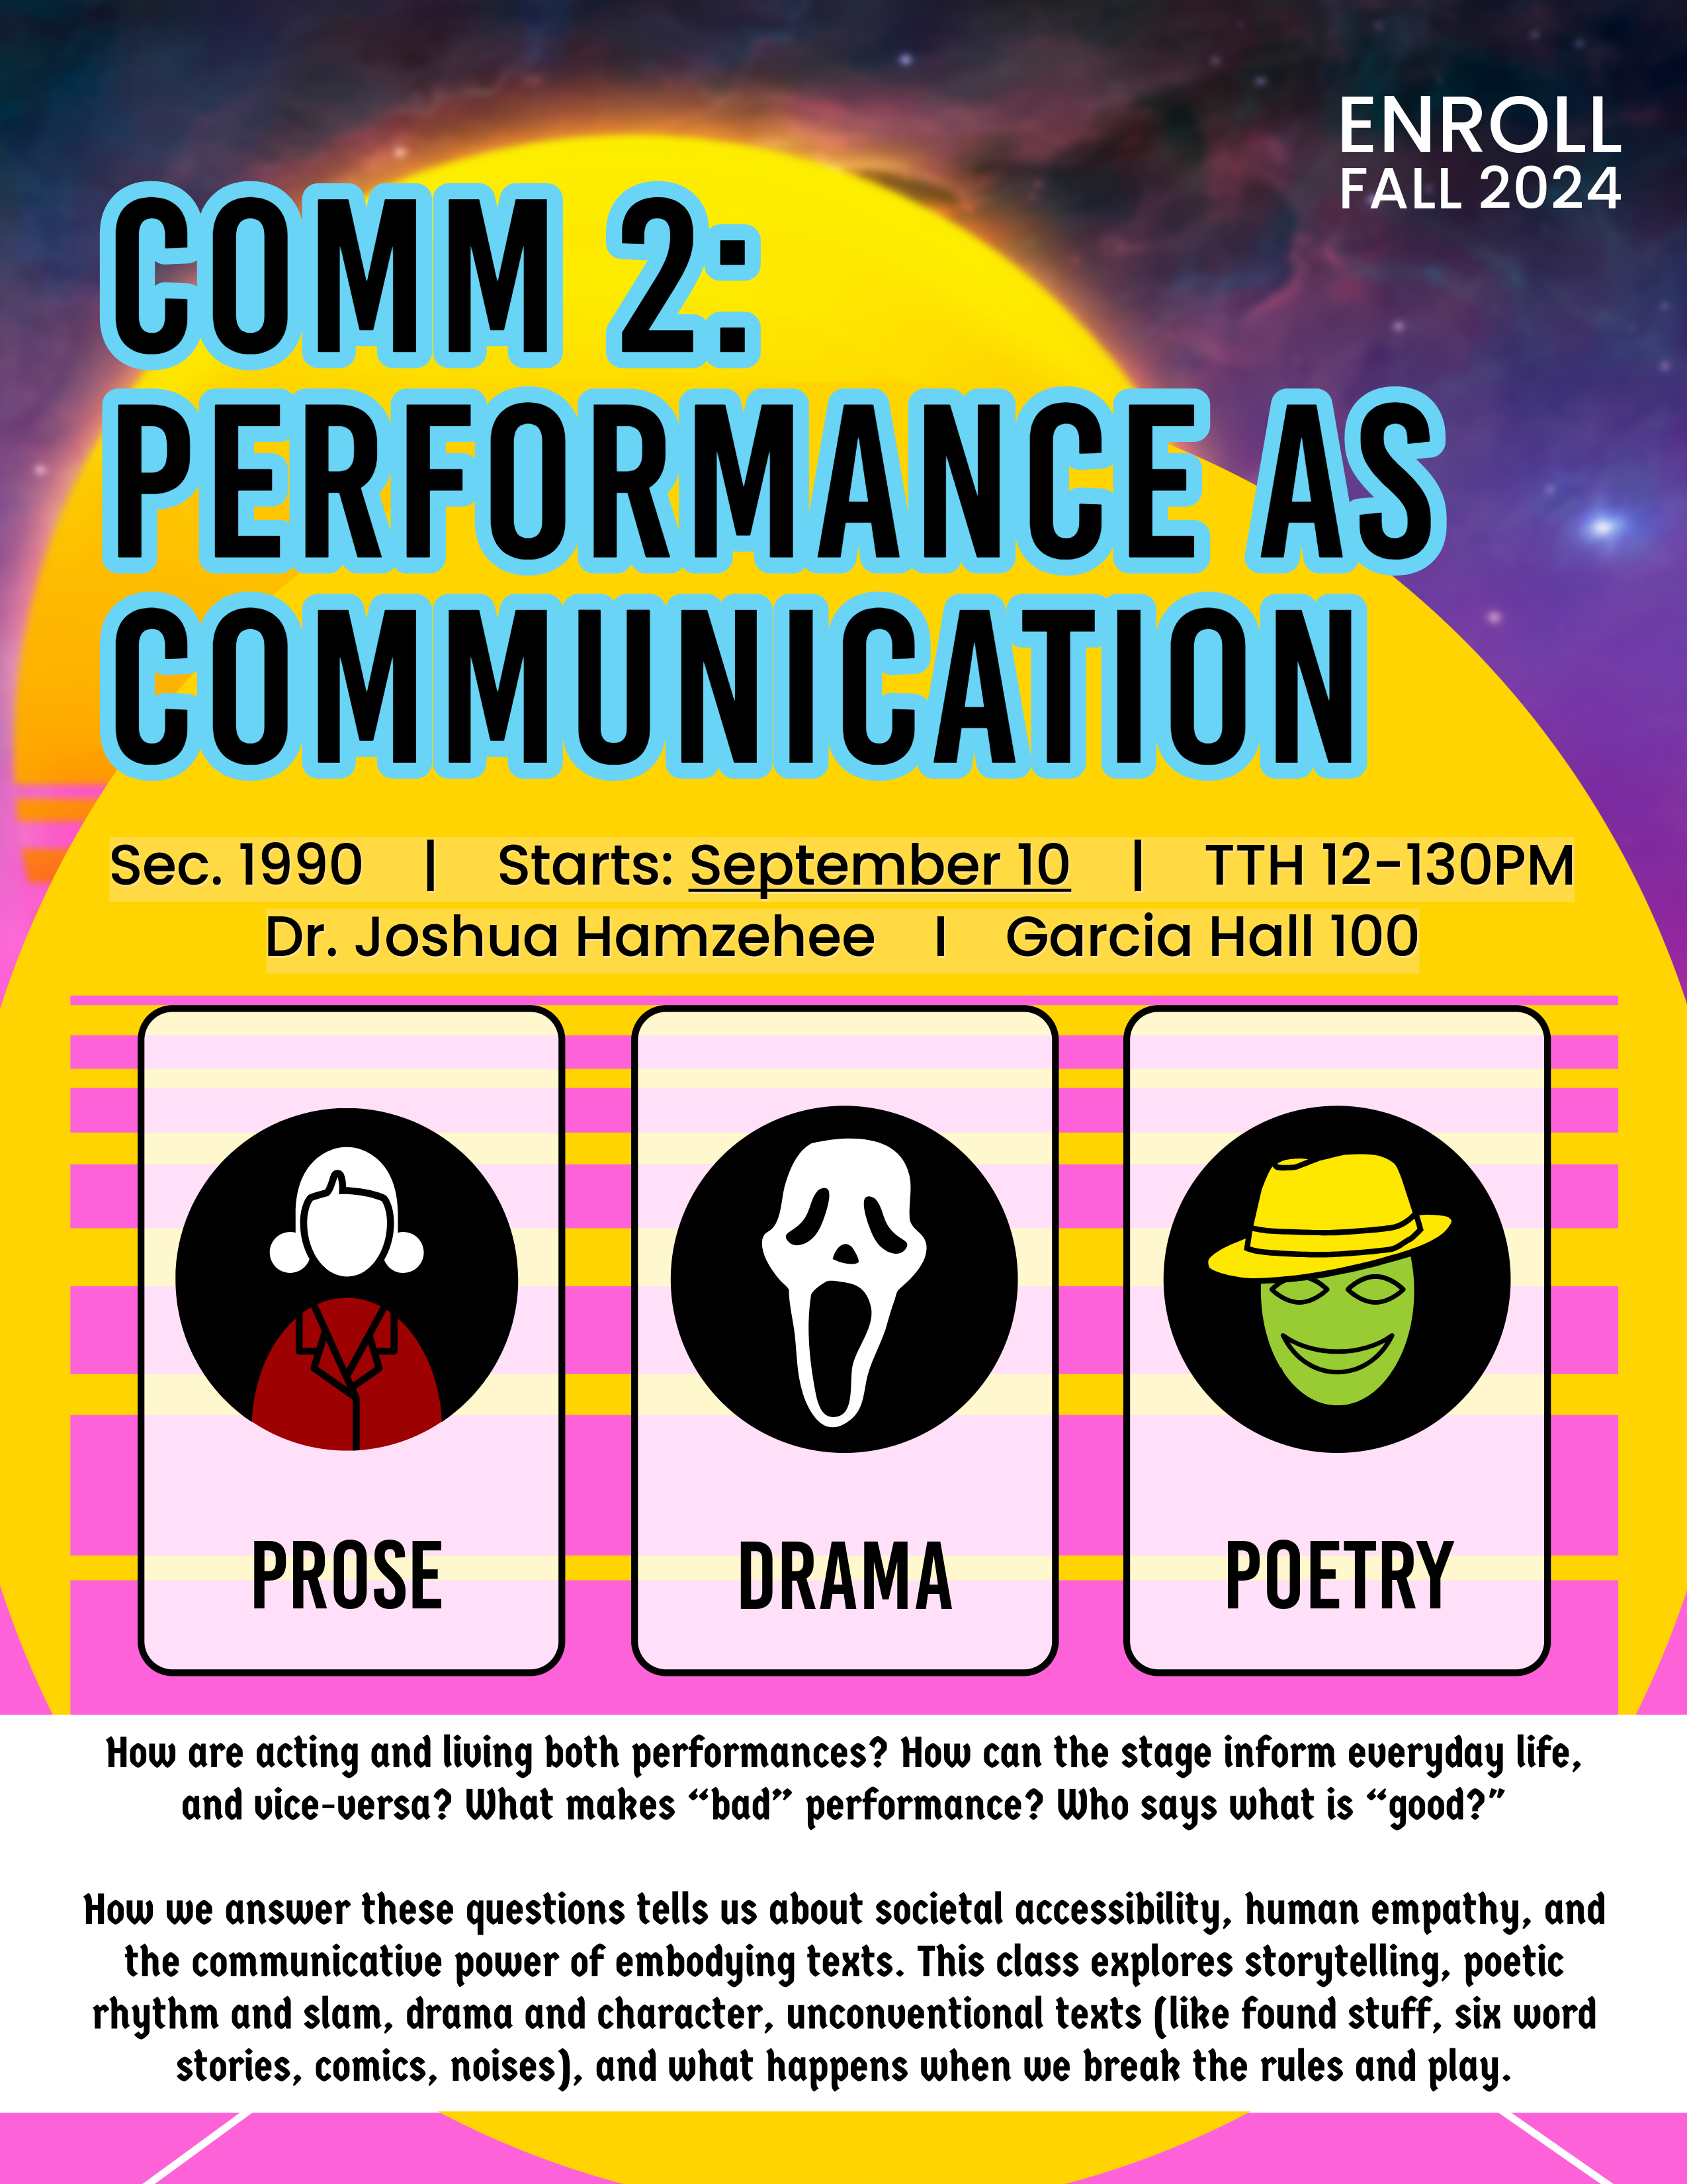 COMM 2: PERFORMANCE AS COMMUNICATION Sec. 1990 I Starts: September 10 |  TTH 12-1:30PM | Dr. Joshua Hamzehee I Garcia Hall 100. PROSE. DRAMA. POETRY. How are acting and living both performances? How can the stage inform everyday life, and vice-versa? What makes "bad" performance? Who says what is "good?" How we answer these questions tells us about societal accessibility, human empathy, and the communicative power of embodying texts. This class explores storytelling, poetic rhythm and slam, drama and character, unconventional texts (like found stuff, six word stories, comics, noises), and what happens when we break the rules and play.